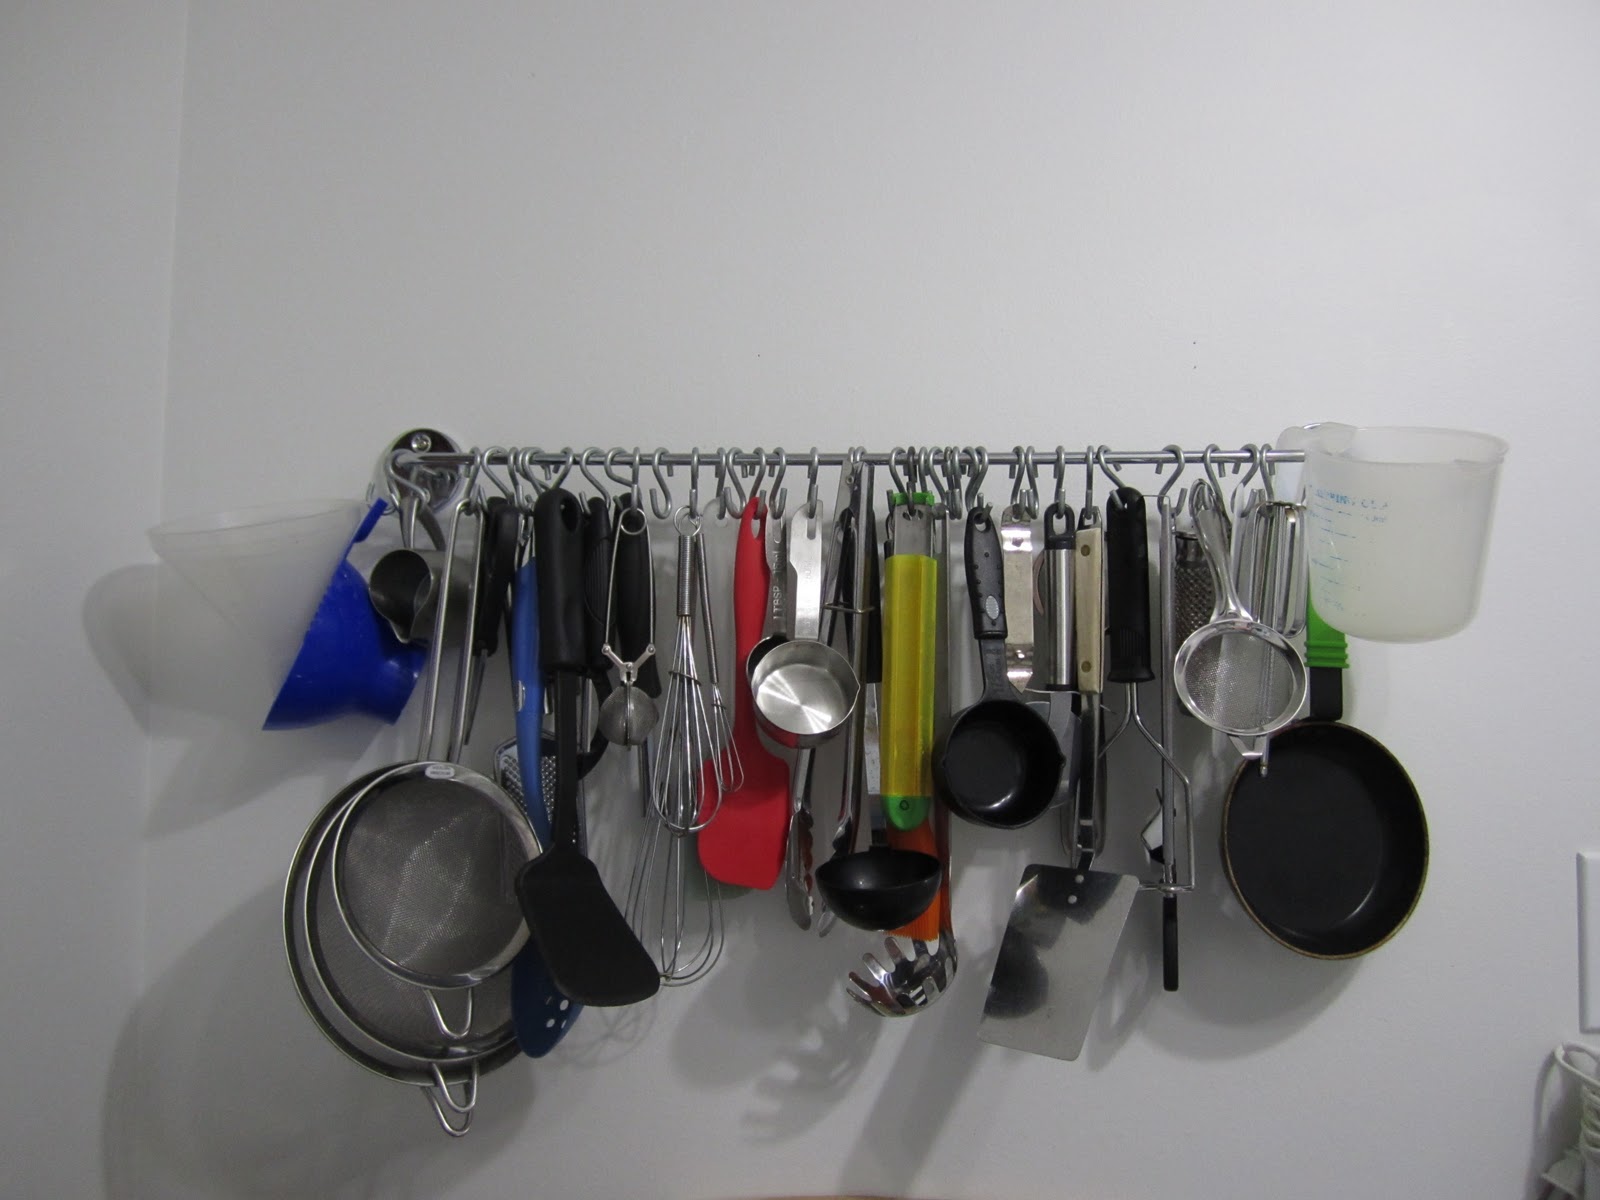 Busy Fingers: Organizing Kitchen Tools